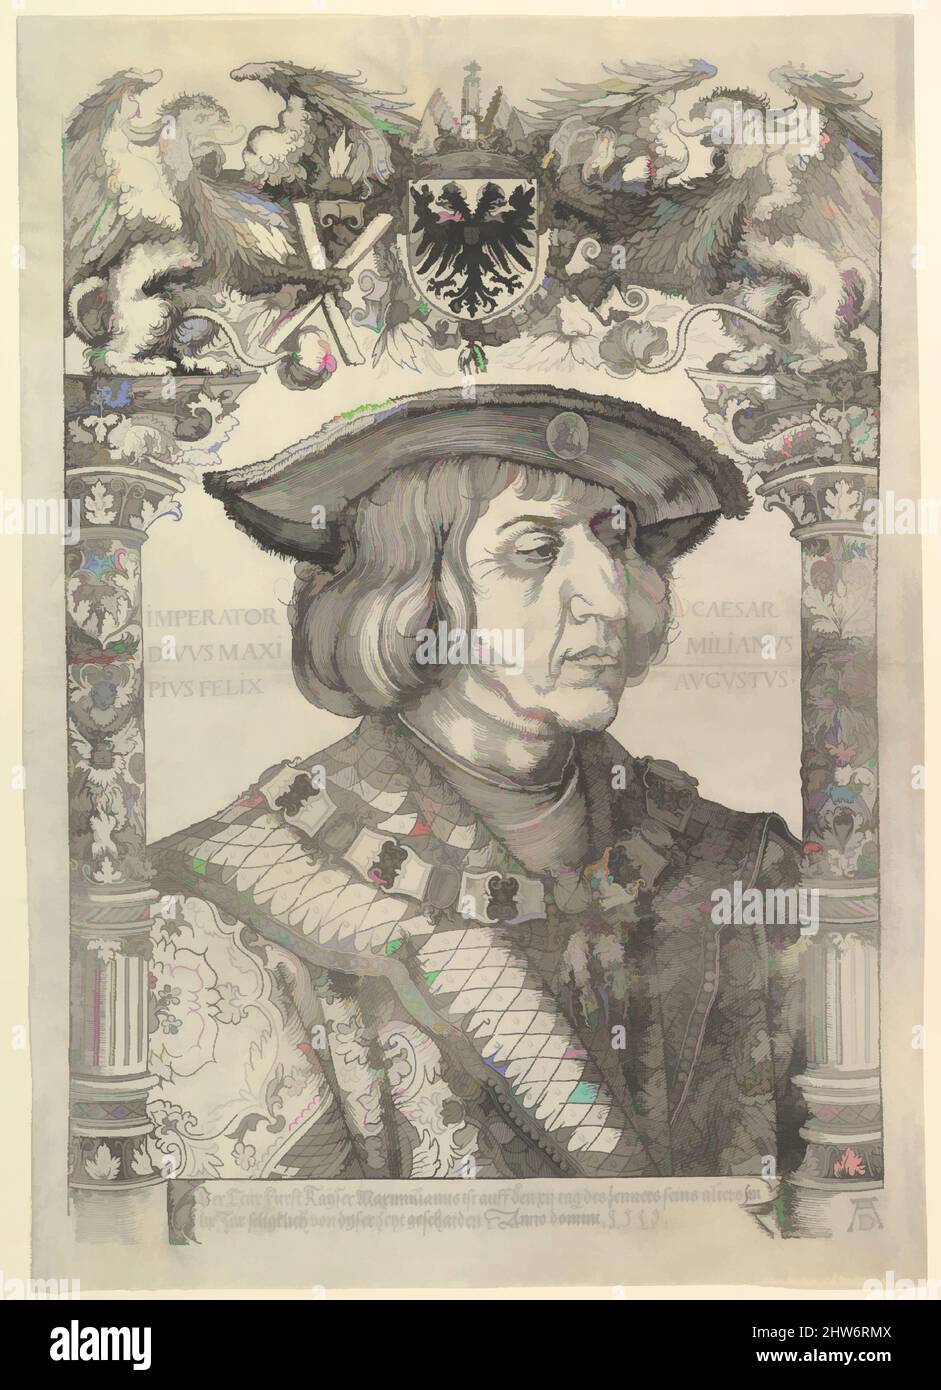 Art inspired by Portrait of the Emperor Maximilian I in an Architectural Frame (copy), n.d., Woodcut, sheet: 22 7/8 x 16 1/16 in. (58.1 x 40.8 cm), Prints, Hans Weiditz the Younger (German, Freiburg im Breisgau before 1500–ca. 1536 Strasbourg), After Albrecht Dürer (German, Nuremberg, Classic works modernized by Artotop with a splash of modernity. Shapes, color and value, eye-catching visual impact on art. Emotions through freedom of artworks in a contemporary way. A timeless message pursuing a wildly creative new direction. Artists turning to the digital medium and creating the Artotop NFT Stock Photo